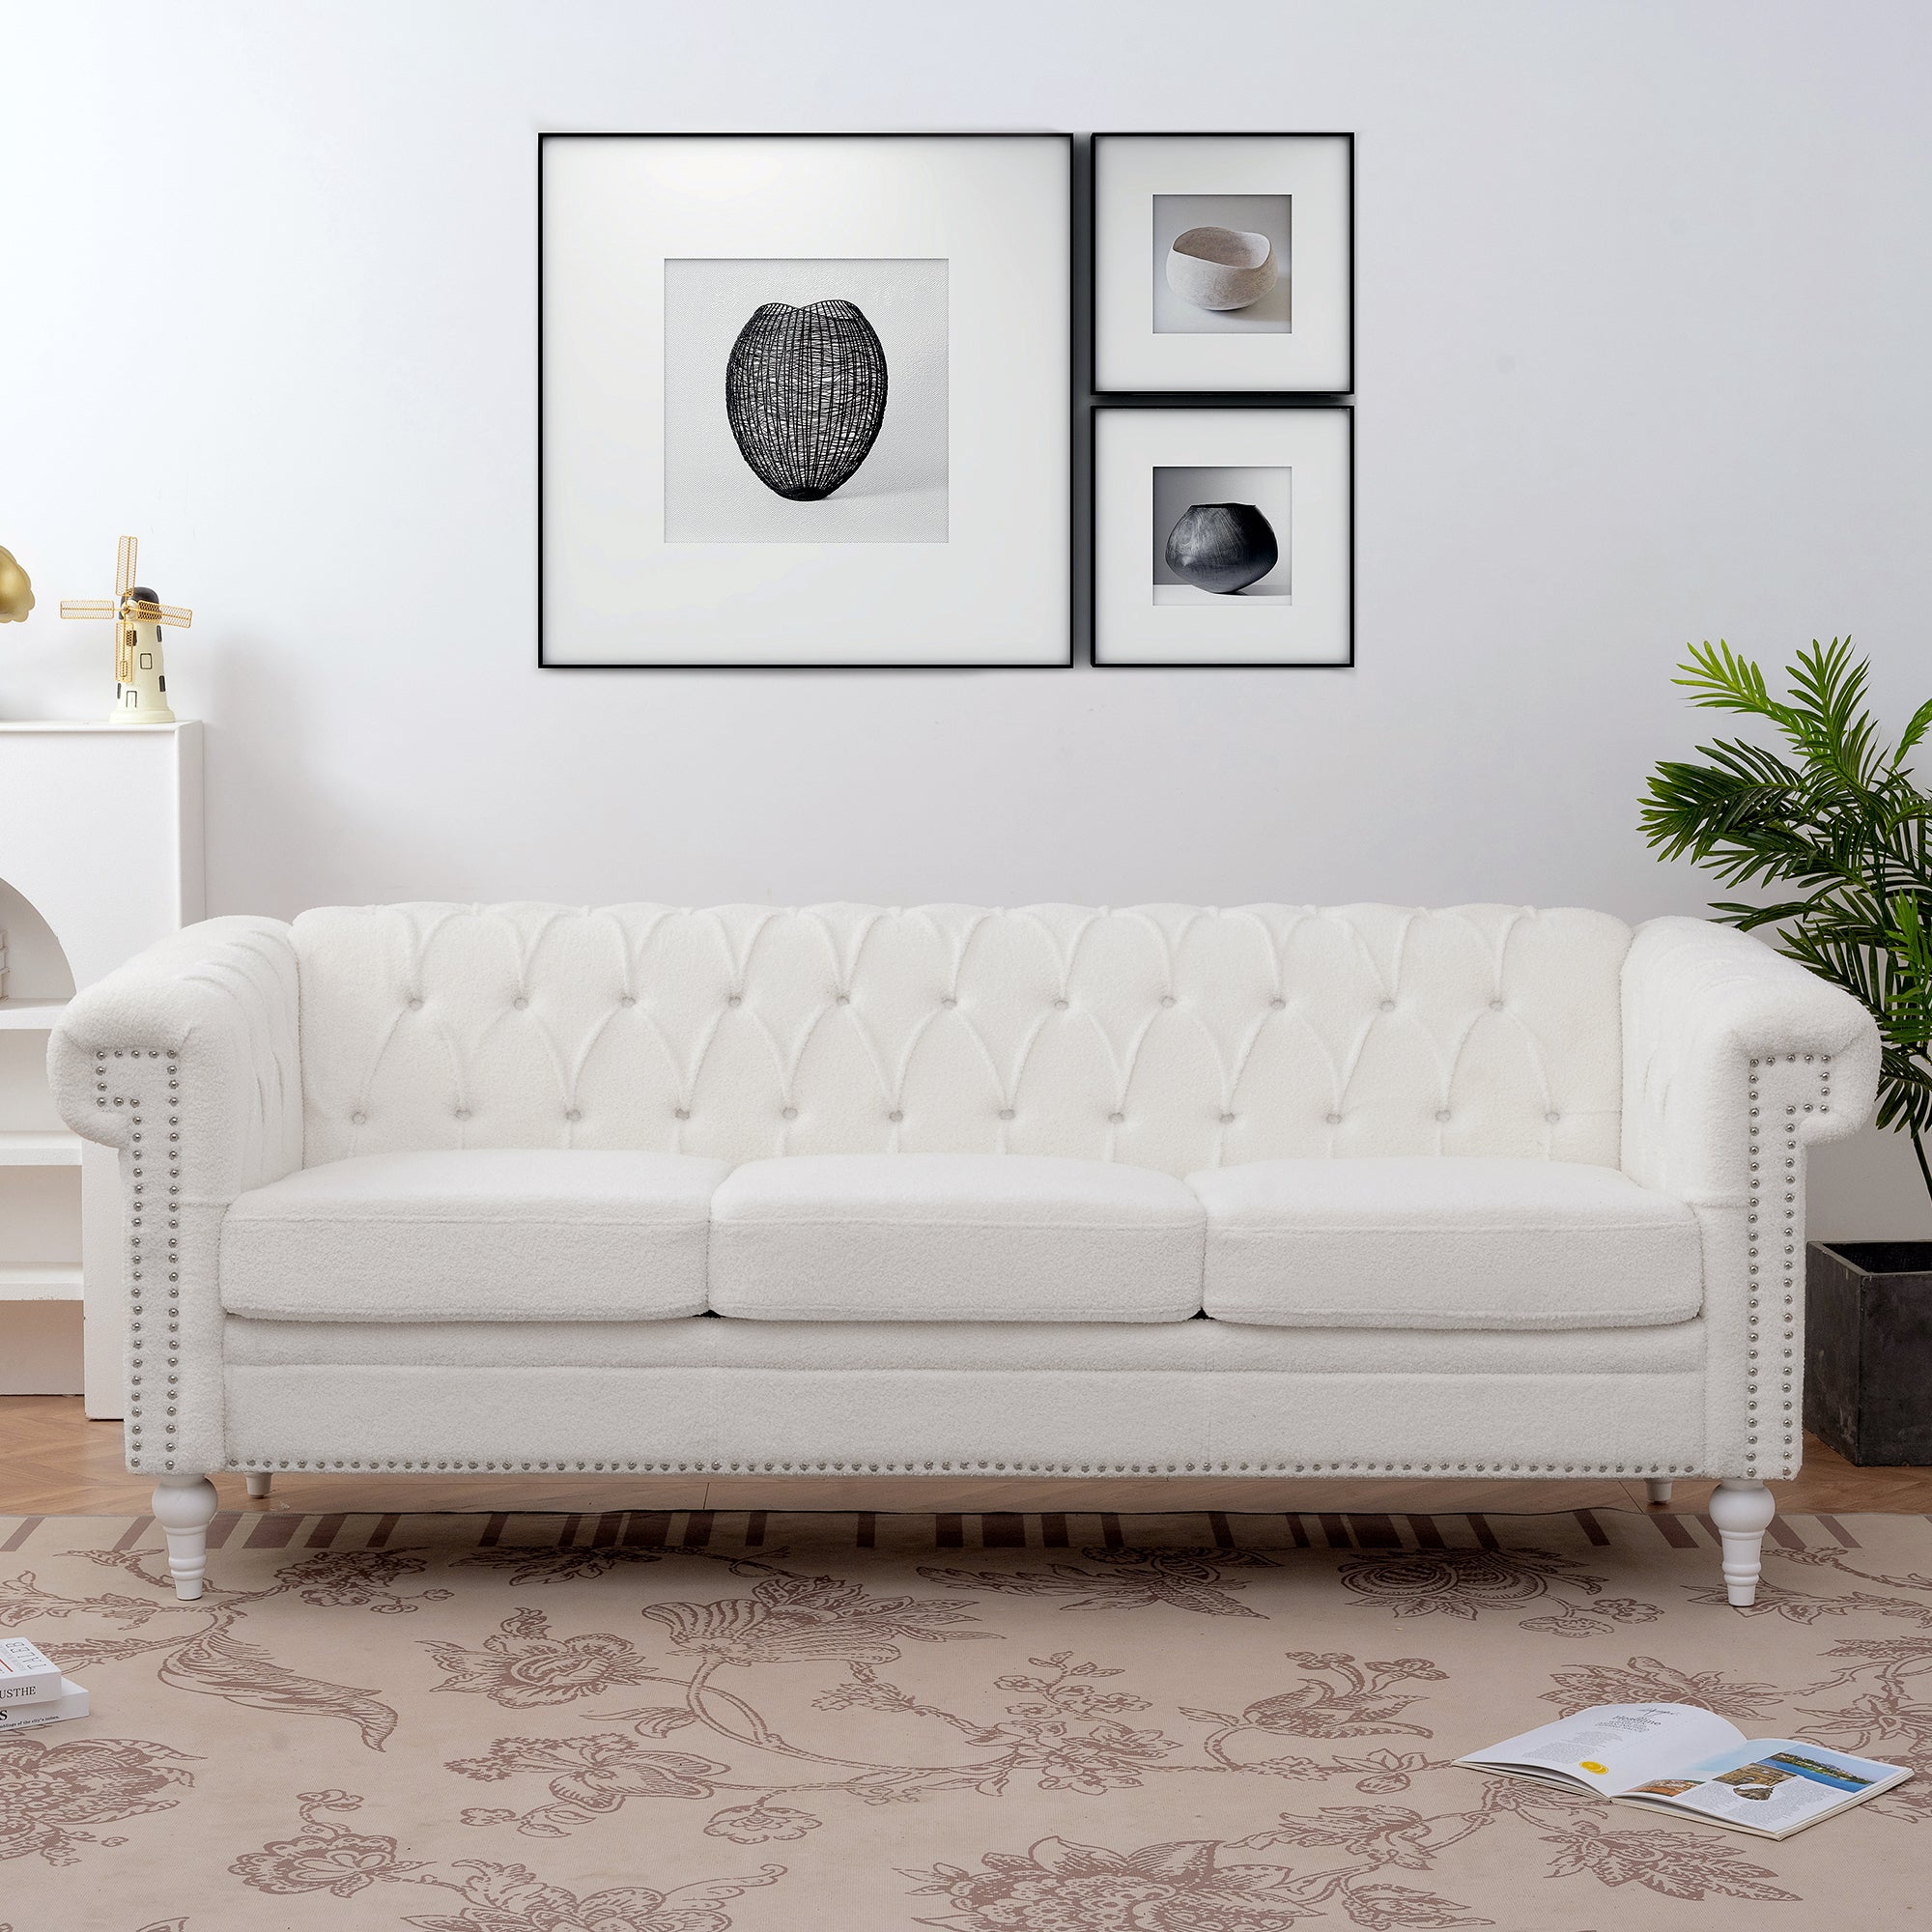 Juliet 83.66" White Boucle Chesterfield Sofa